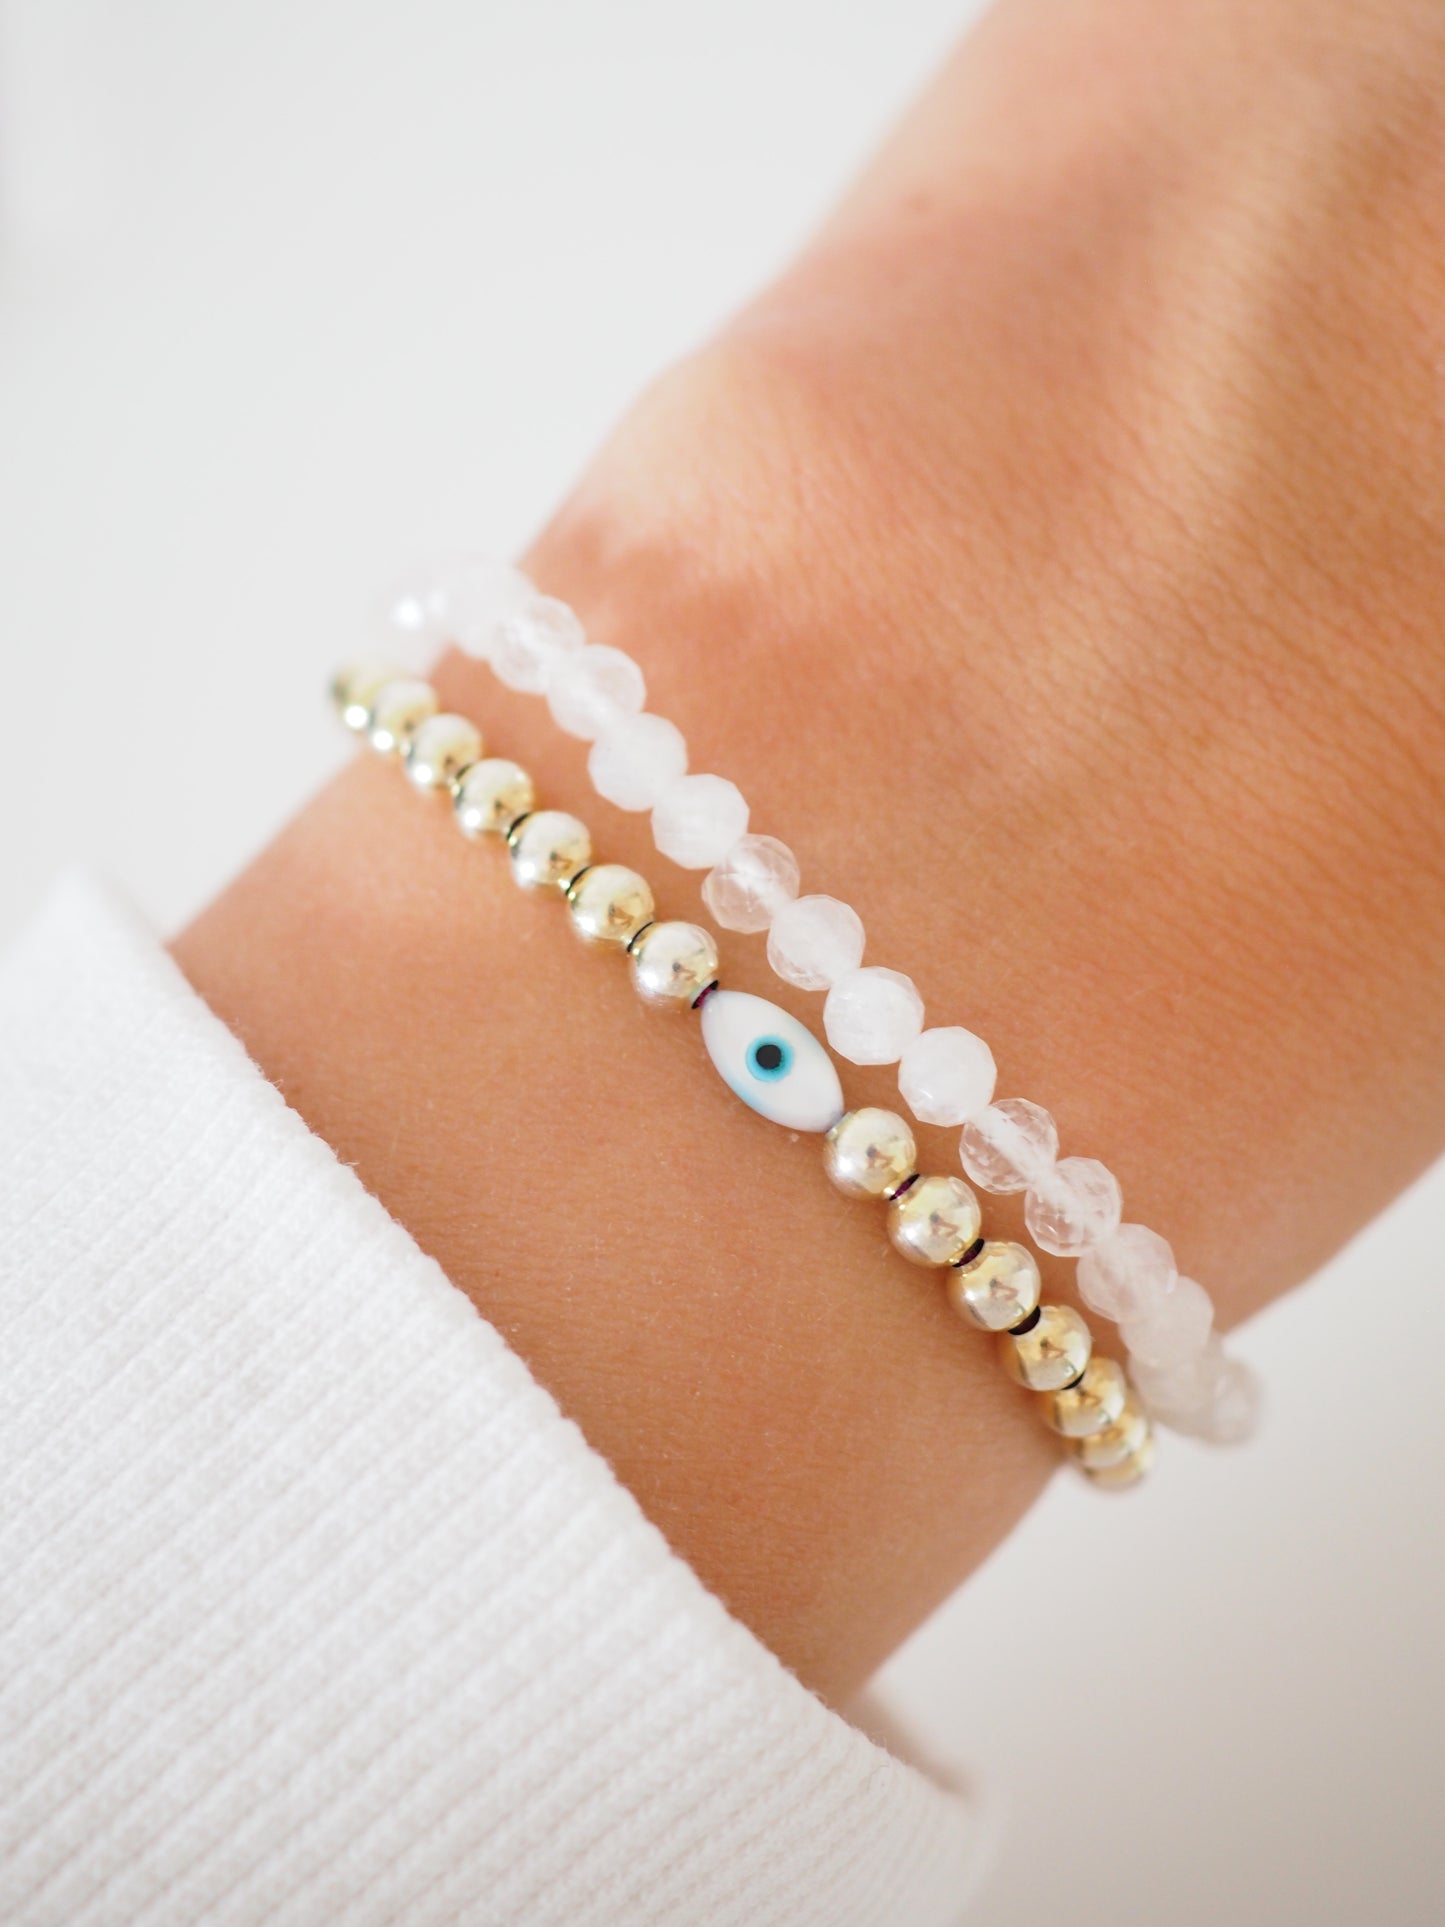 Facettiertes weisses Mondstein Armband . Faceted White Moonstone Bracelet - High Quality